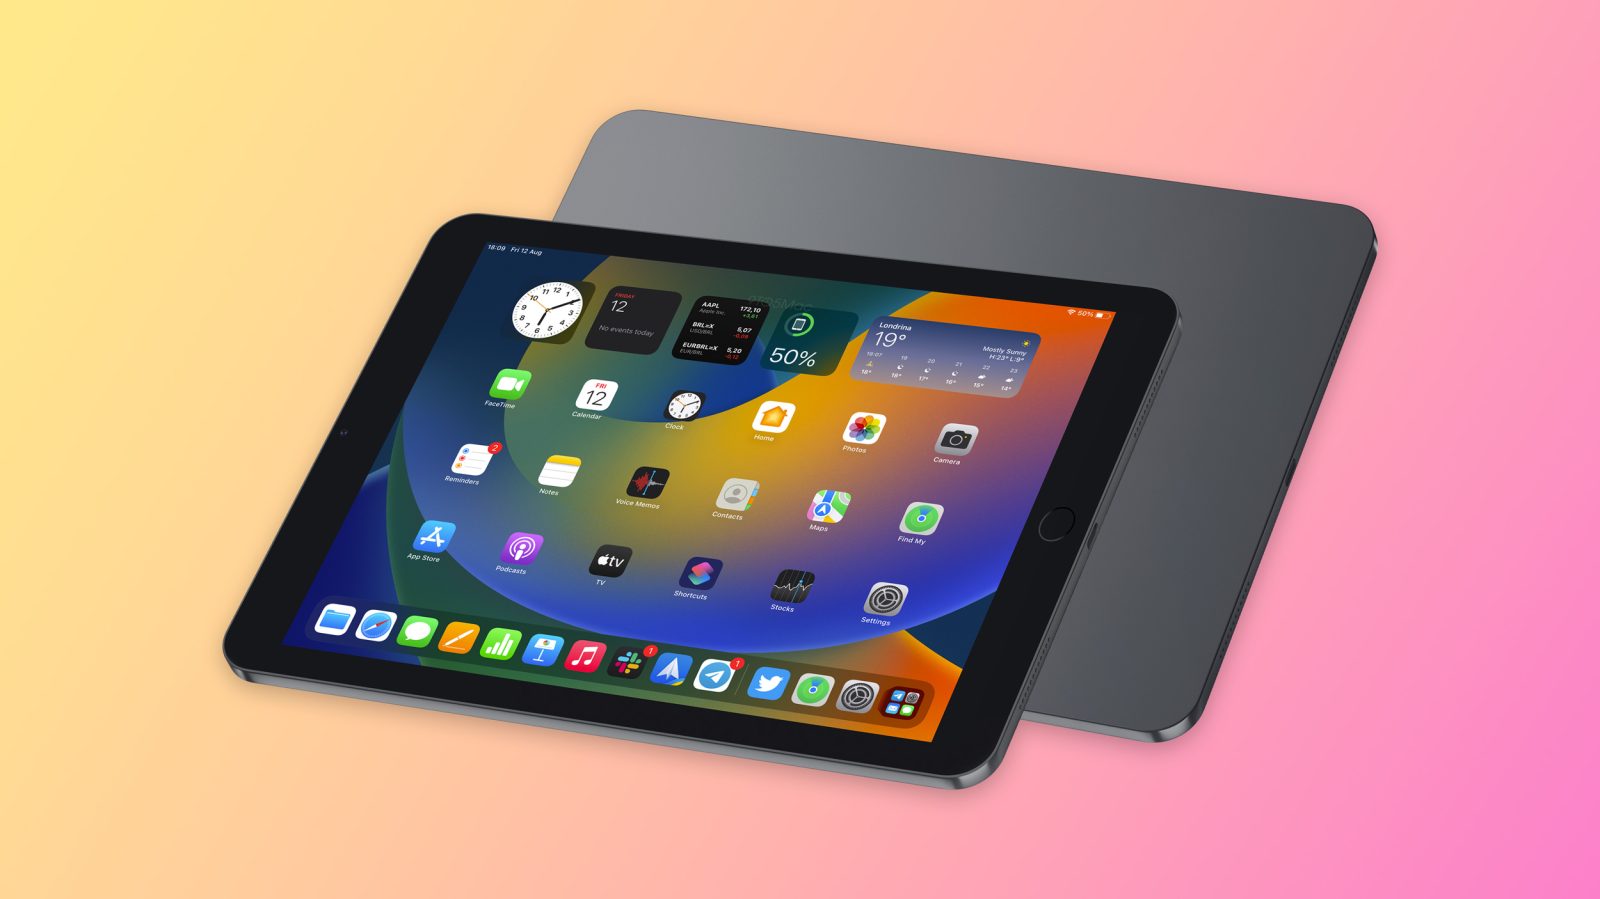 10th generation iPad: Here’s everything we know so far